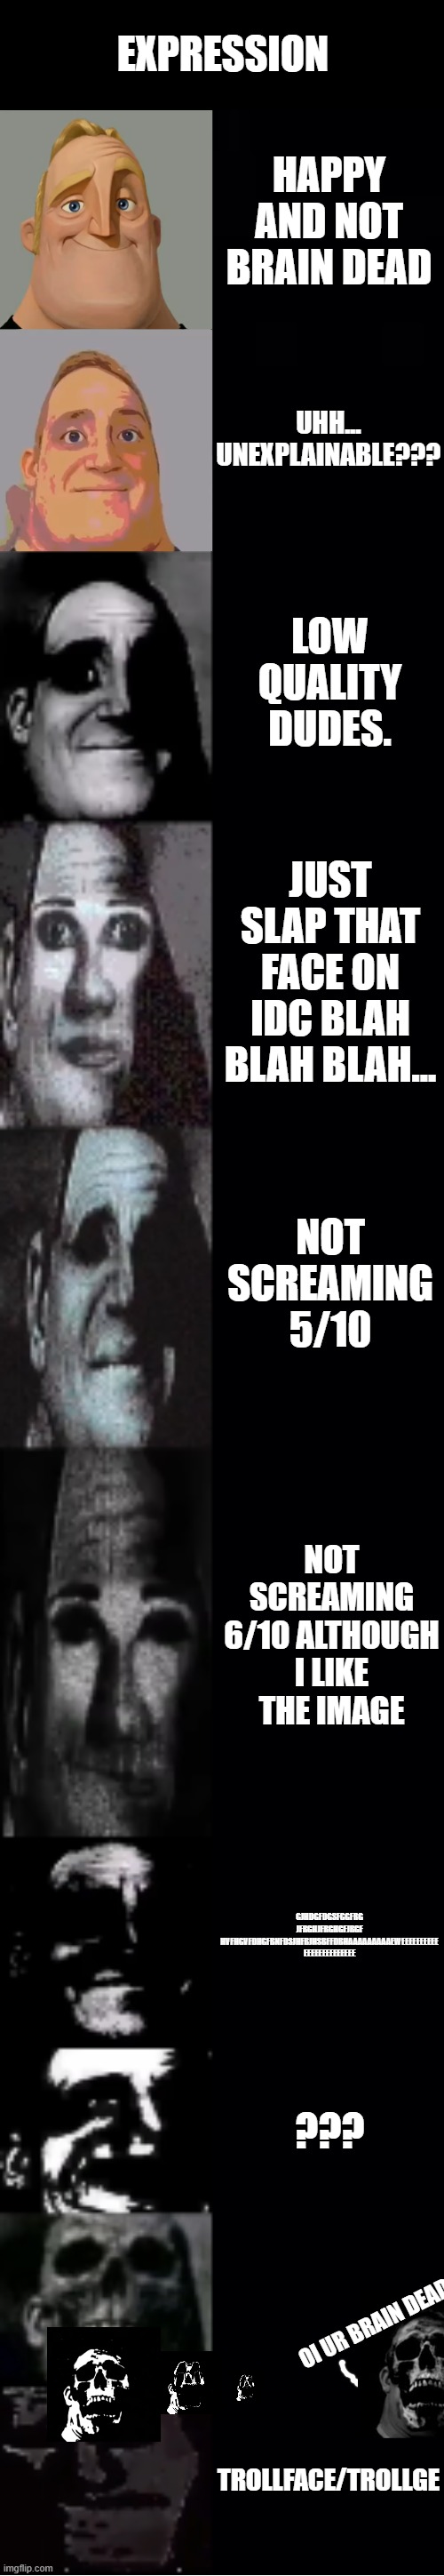 uncanny | EXPRESSION; HAPPY AND NOT BRAIN DEAD; UHH...
UNEXPLAINABLE??? LOW QUALITY DUDES. JUST SLAP THAT FACE ON IDC BLAH BLAH BLAH... NOT SCREAMING 5/10; NOT SCREAMING 6/10 ALTHOUGH I LIKE THE IMAGE; GJHDGFDGSFGGFRG JFRGHJFRGHGFJRGF HVFHGVFDHGFBNFDSJHFBJHSBFFDBHAAAAAAAAAEWEEEEEEEEEE EEEEEEEEEEEEEE; ??? OI UR BRAIN DEAD; TROLLFACE/TROLLGE | image tagged in mr incredible becoming uncanny | made w/ Imgflip meme maker